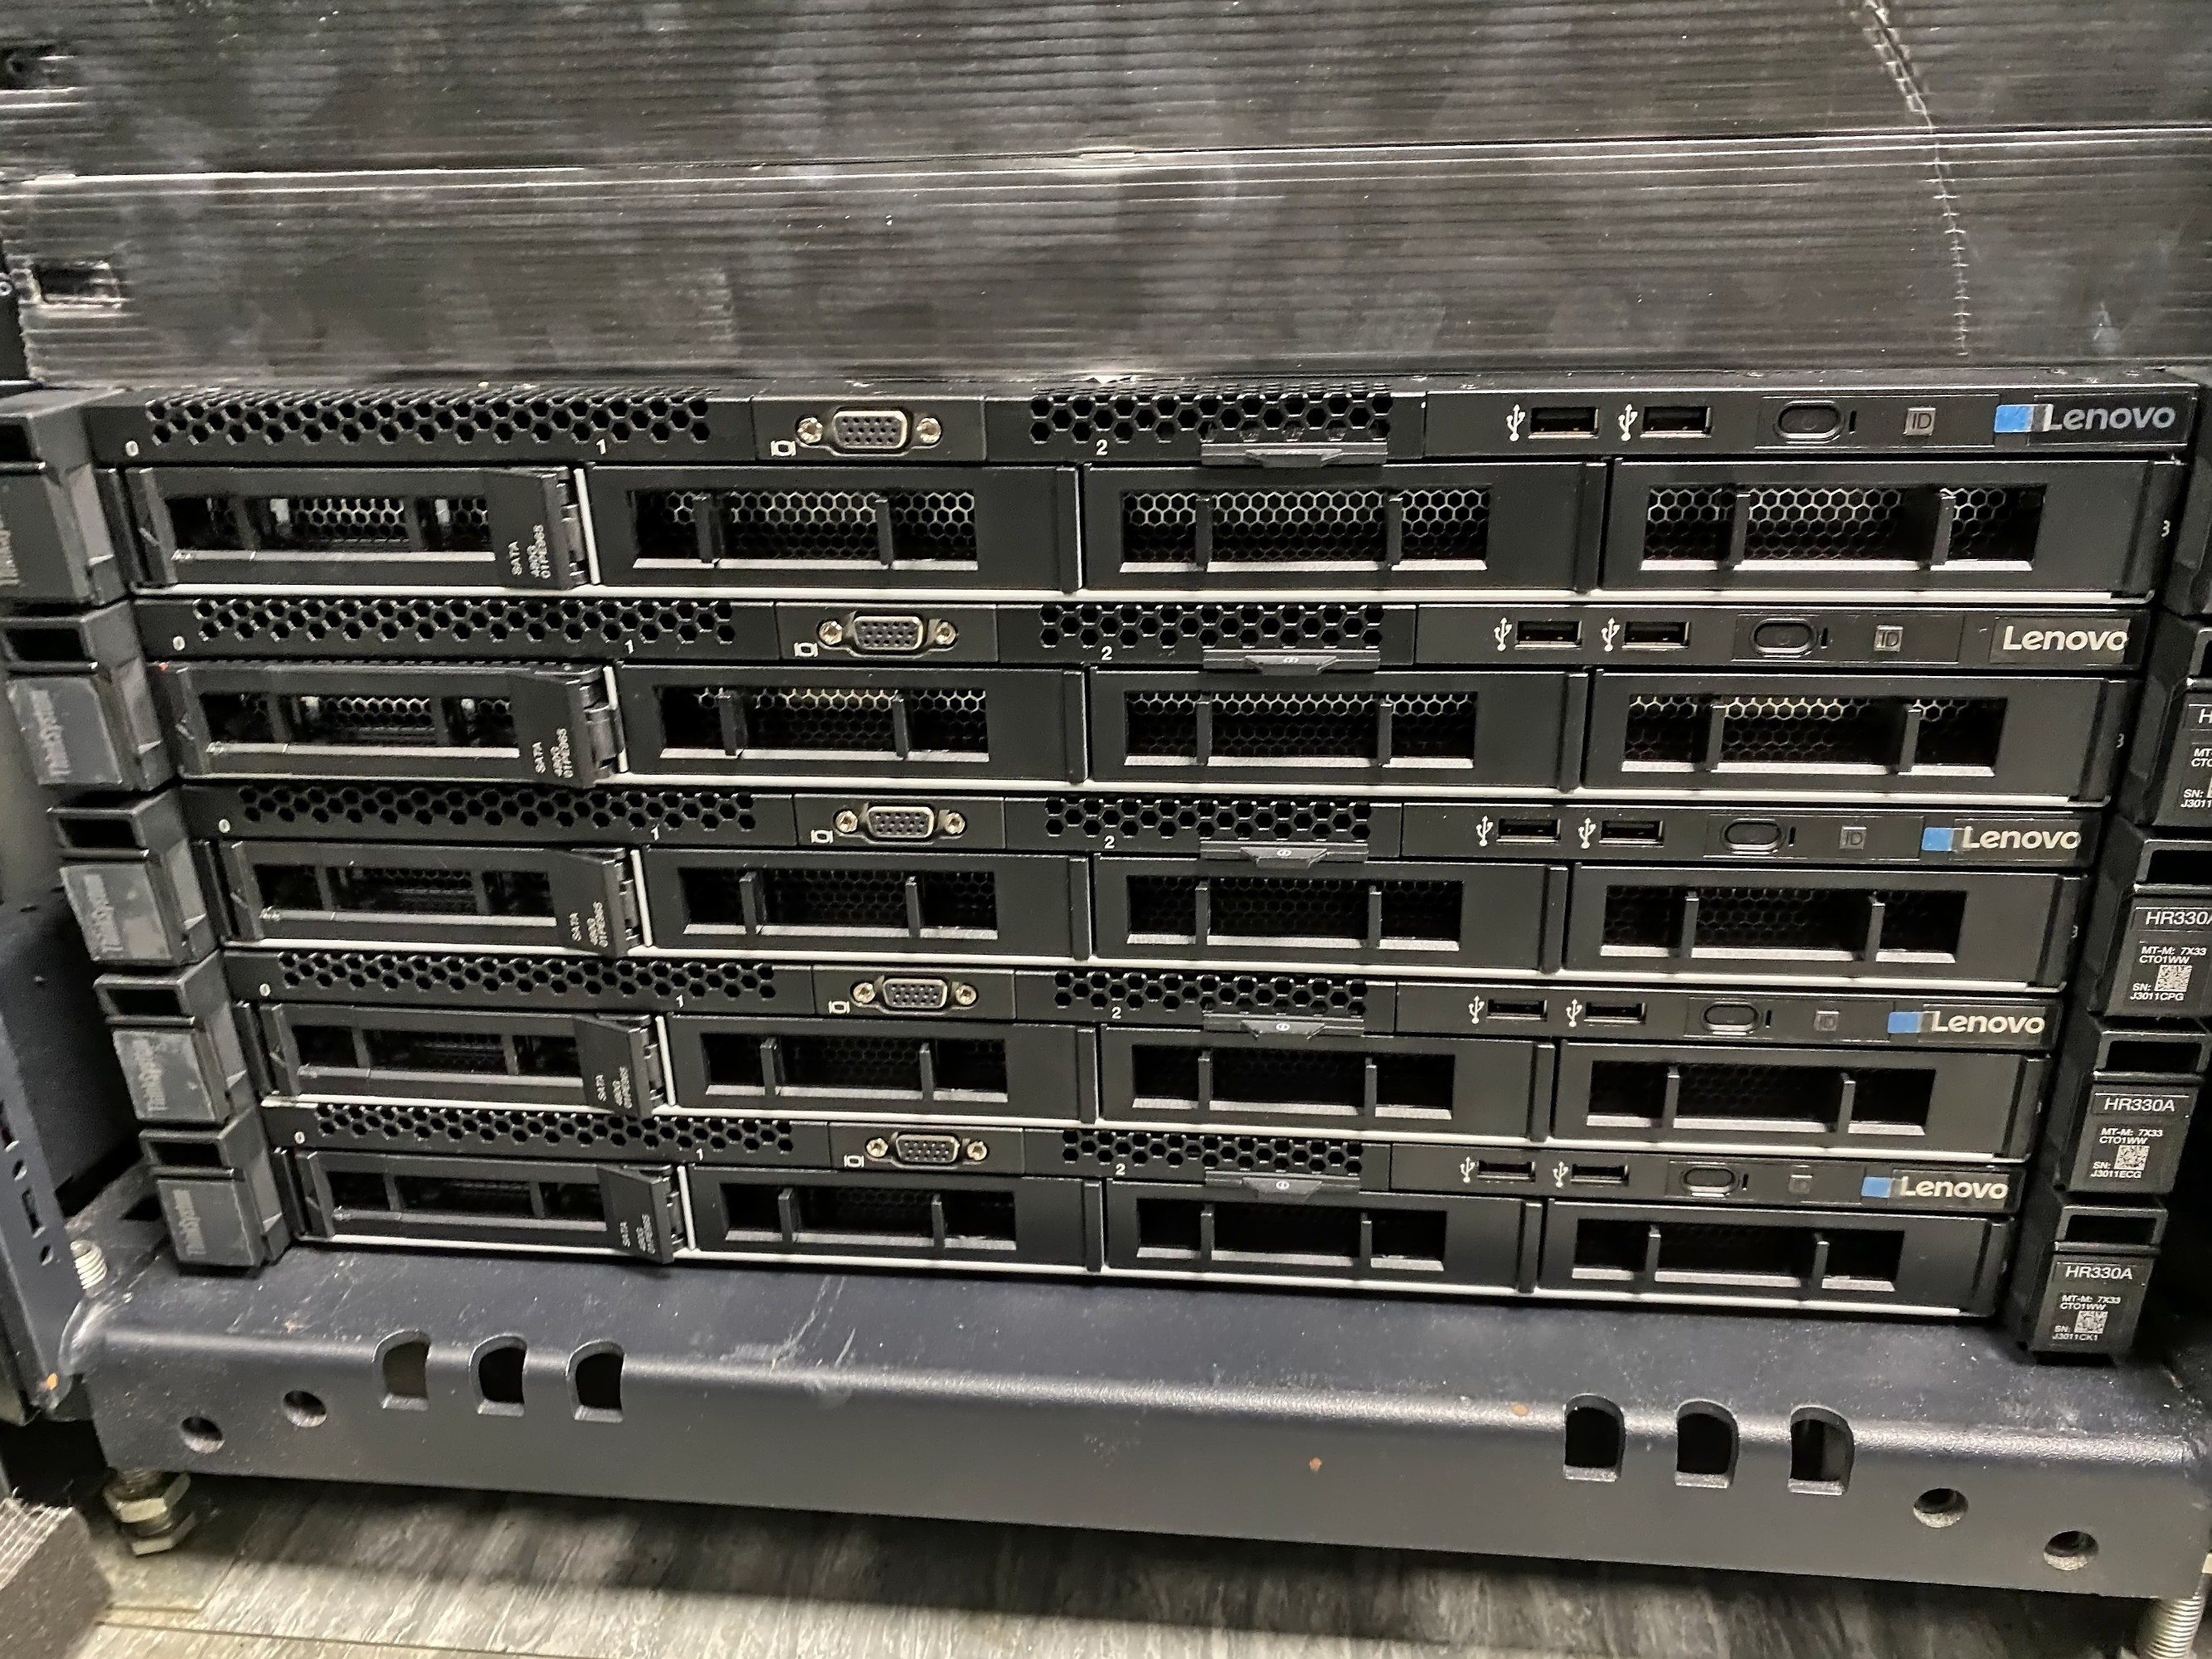 our Arm-based servers